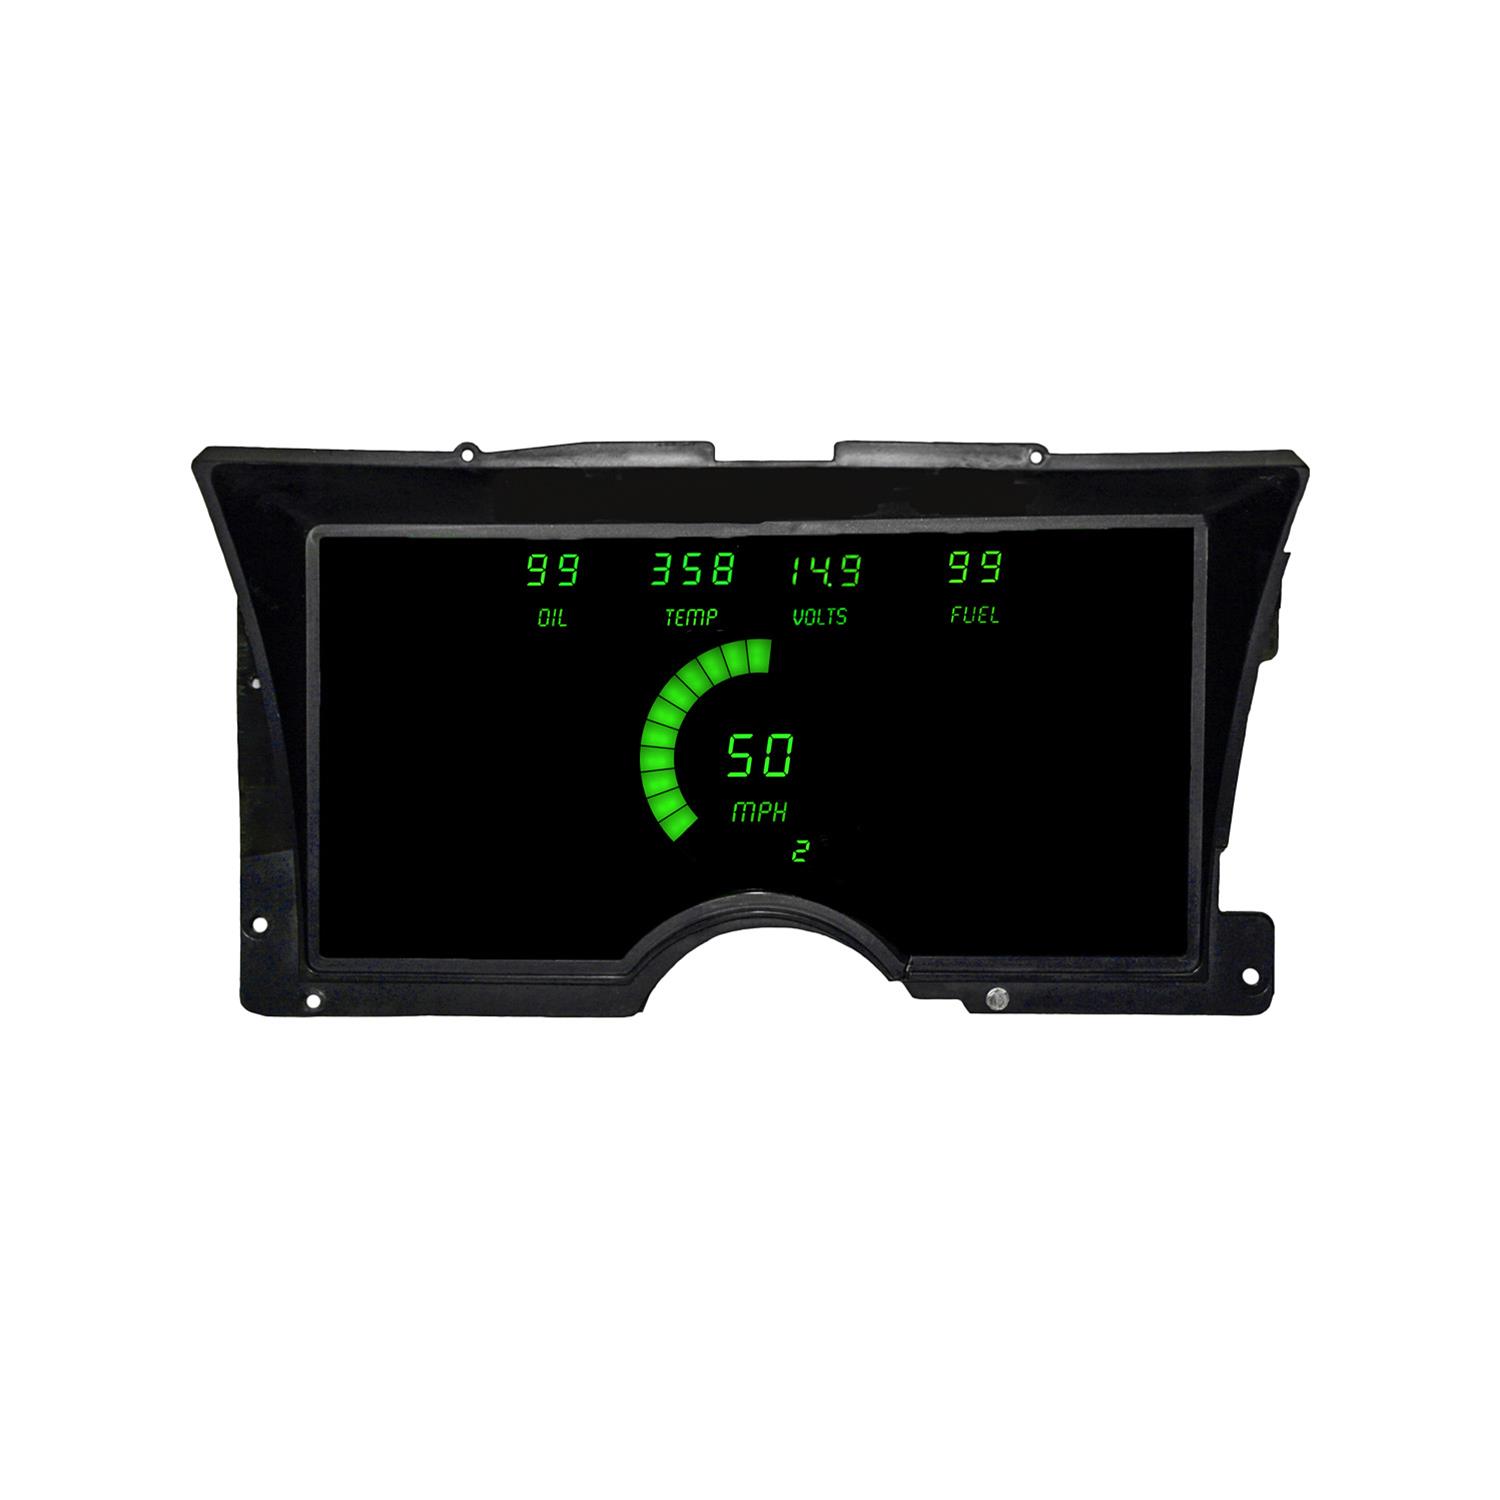 LED Direct Replacement Digital Bargraph Dash Kits for 1992-1994 Chevy Truck [Green]